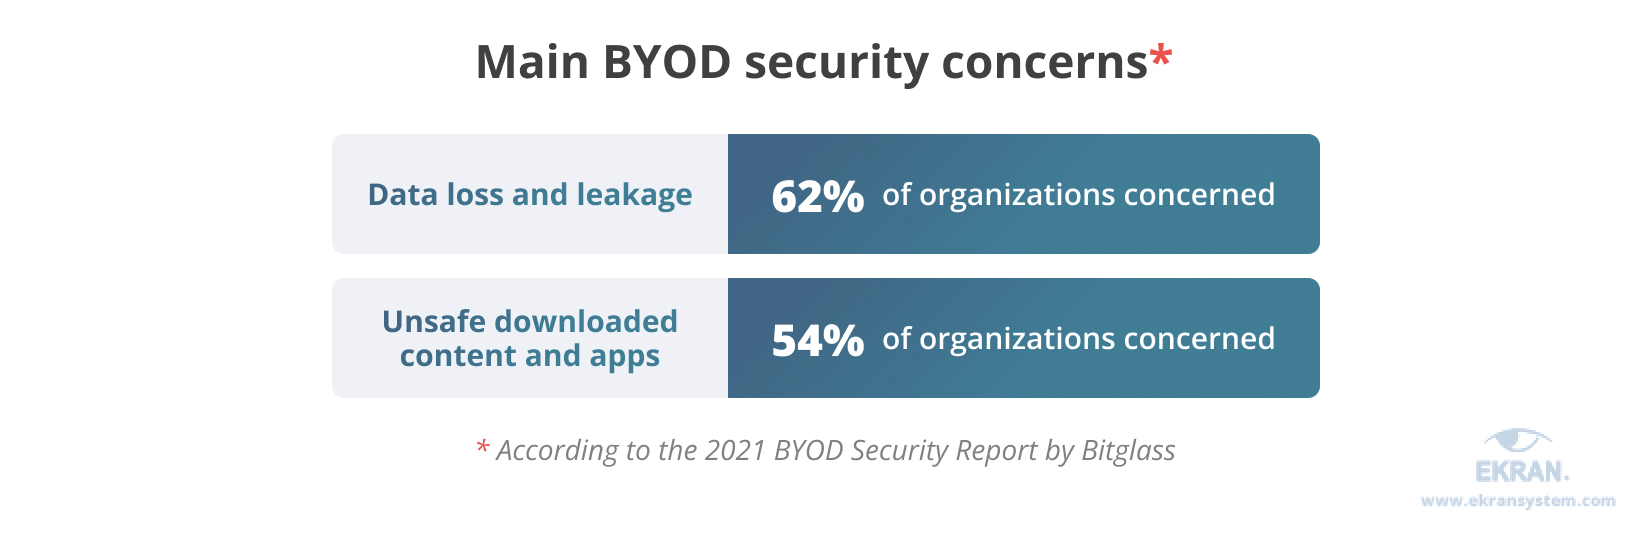 Main BYOD security concerns